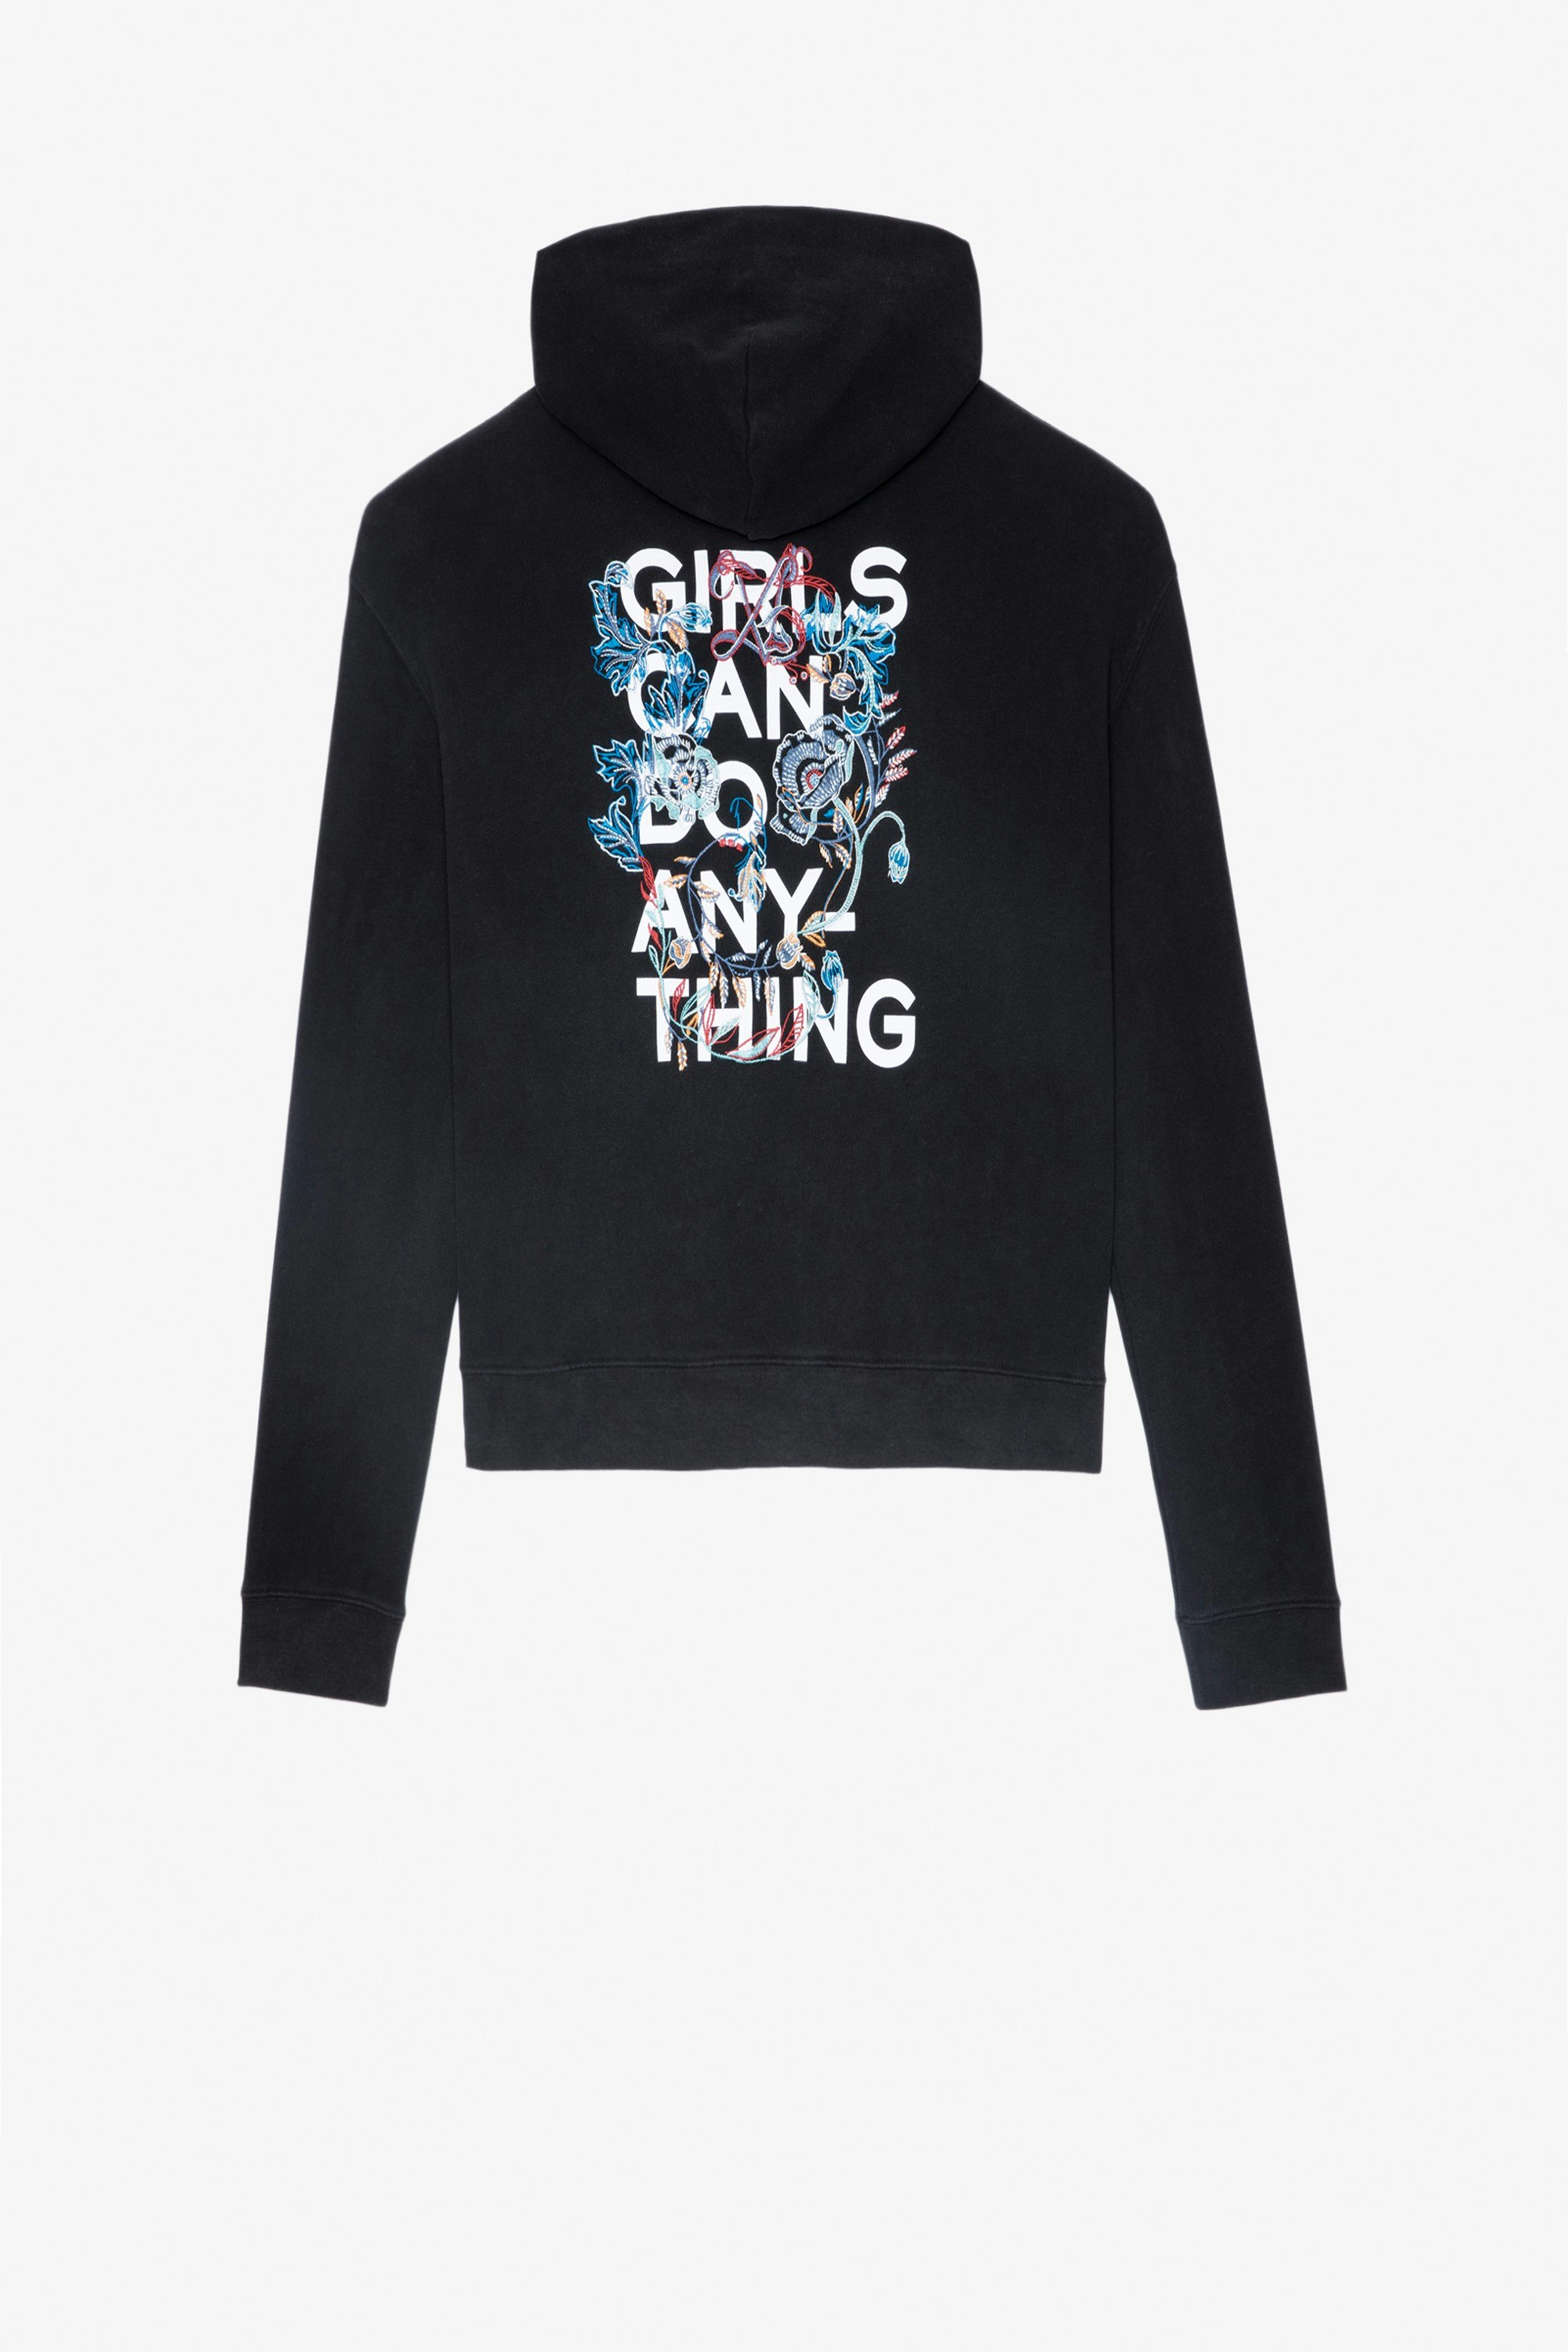 Mona Sweatshirt Women’s black cotton hoodie featuring “Girls can do anything” slogan and flowers on the back